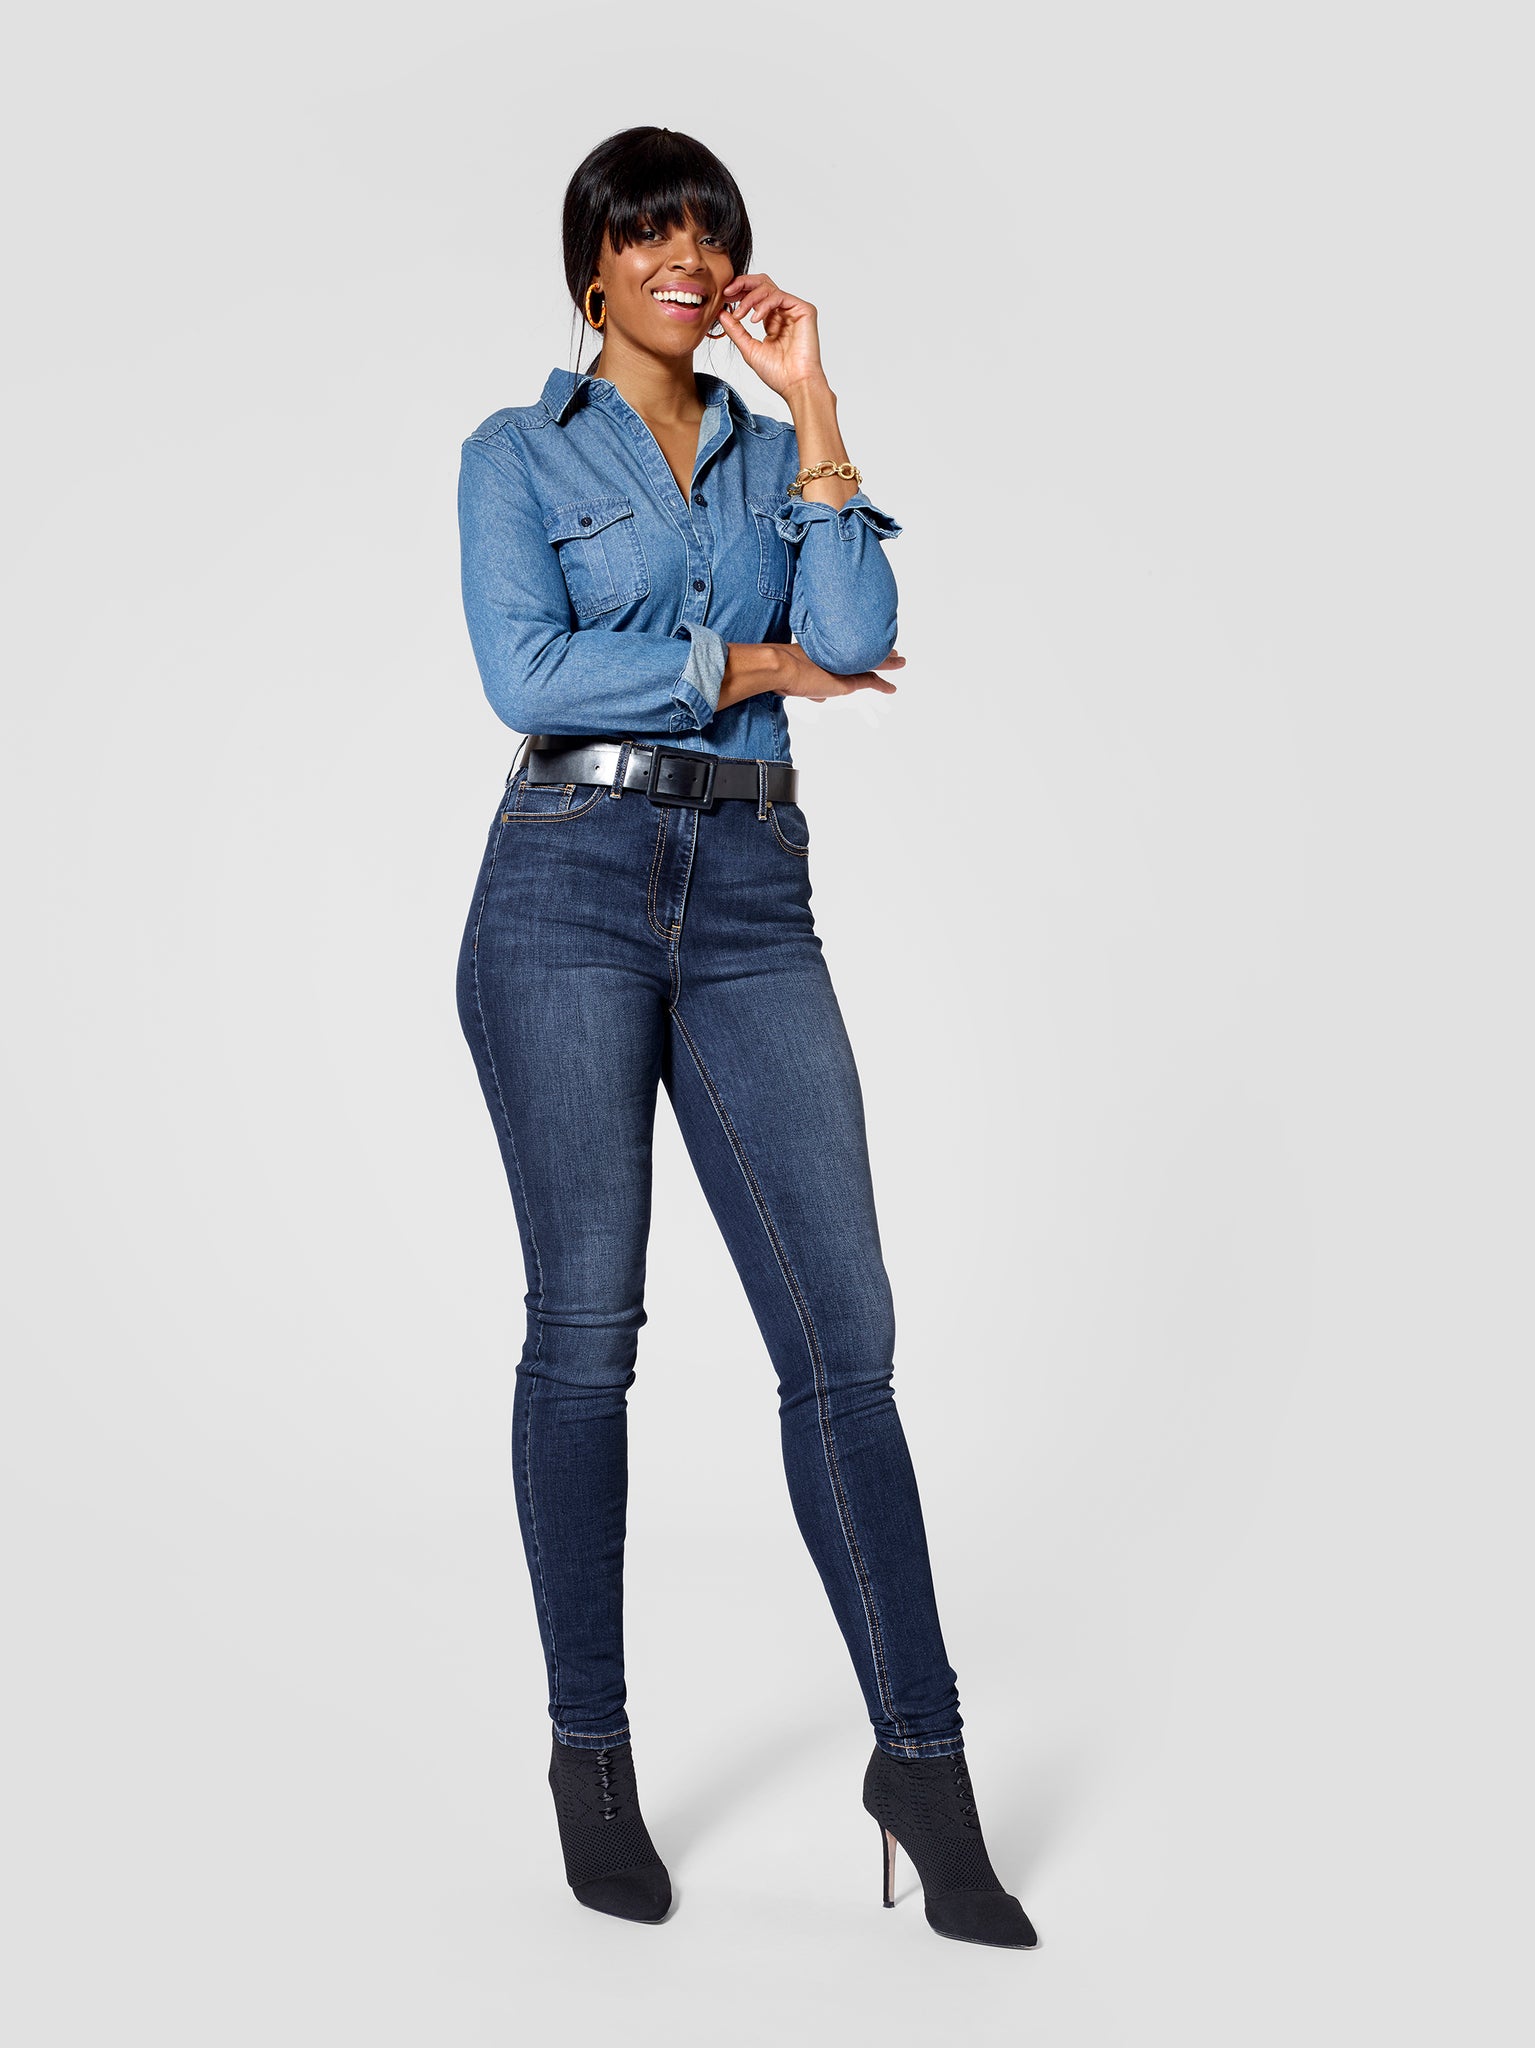 20 Jeans for Thick Thighs That Won't Gap at the Waist 2022: Everlane,  Levi's, Madewell, Good American | SELF